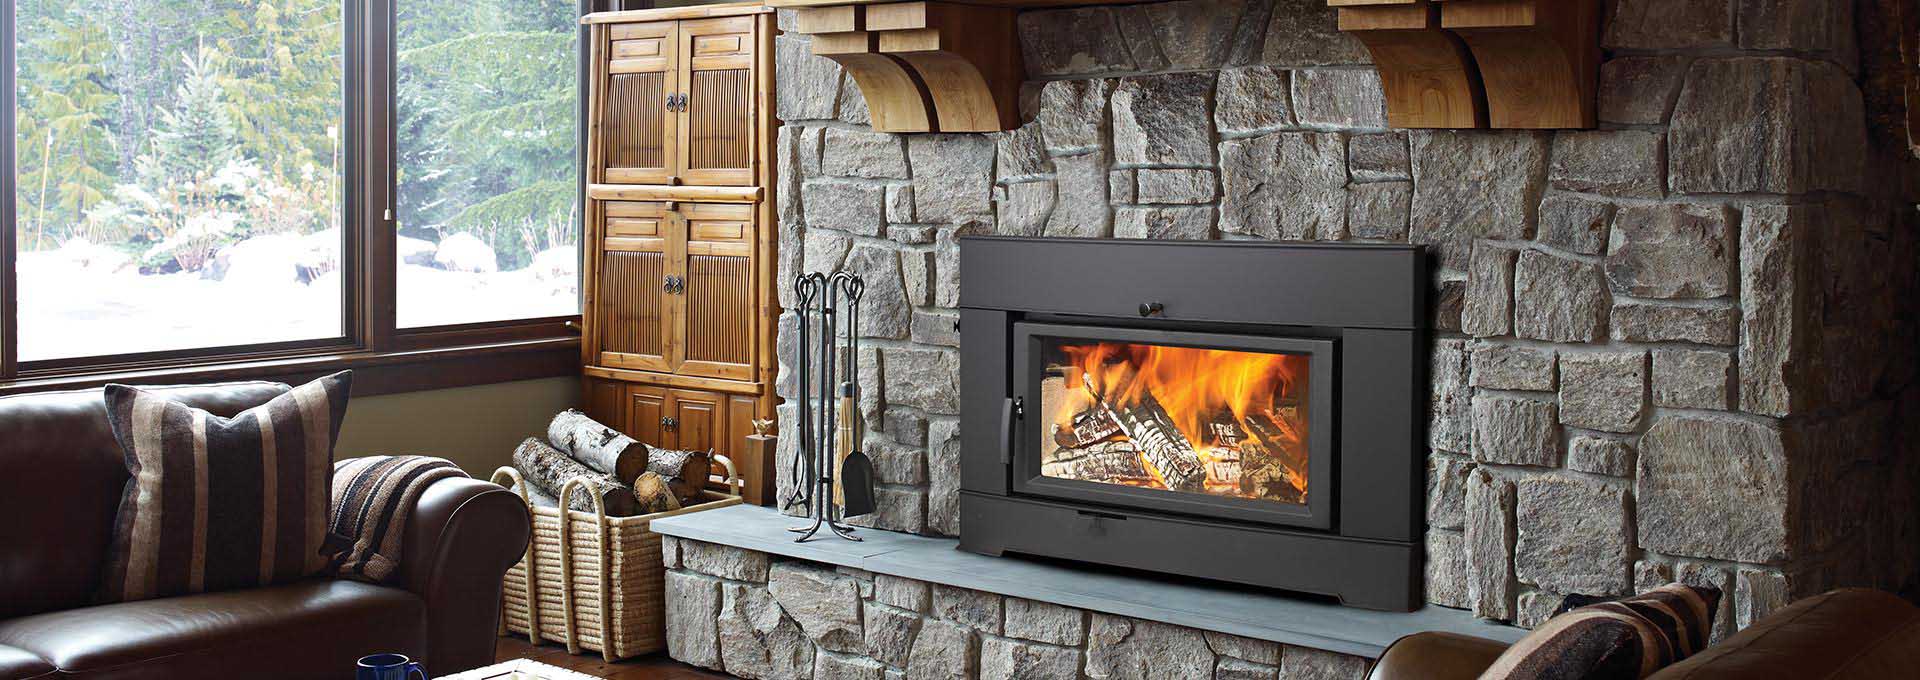 Fireplace Inserts Explained | Typical Sizing, Functionality & More! 